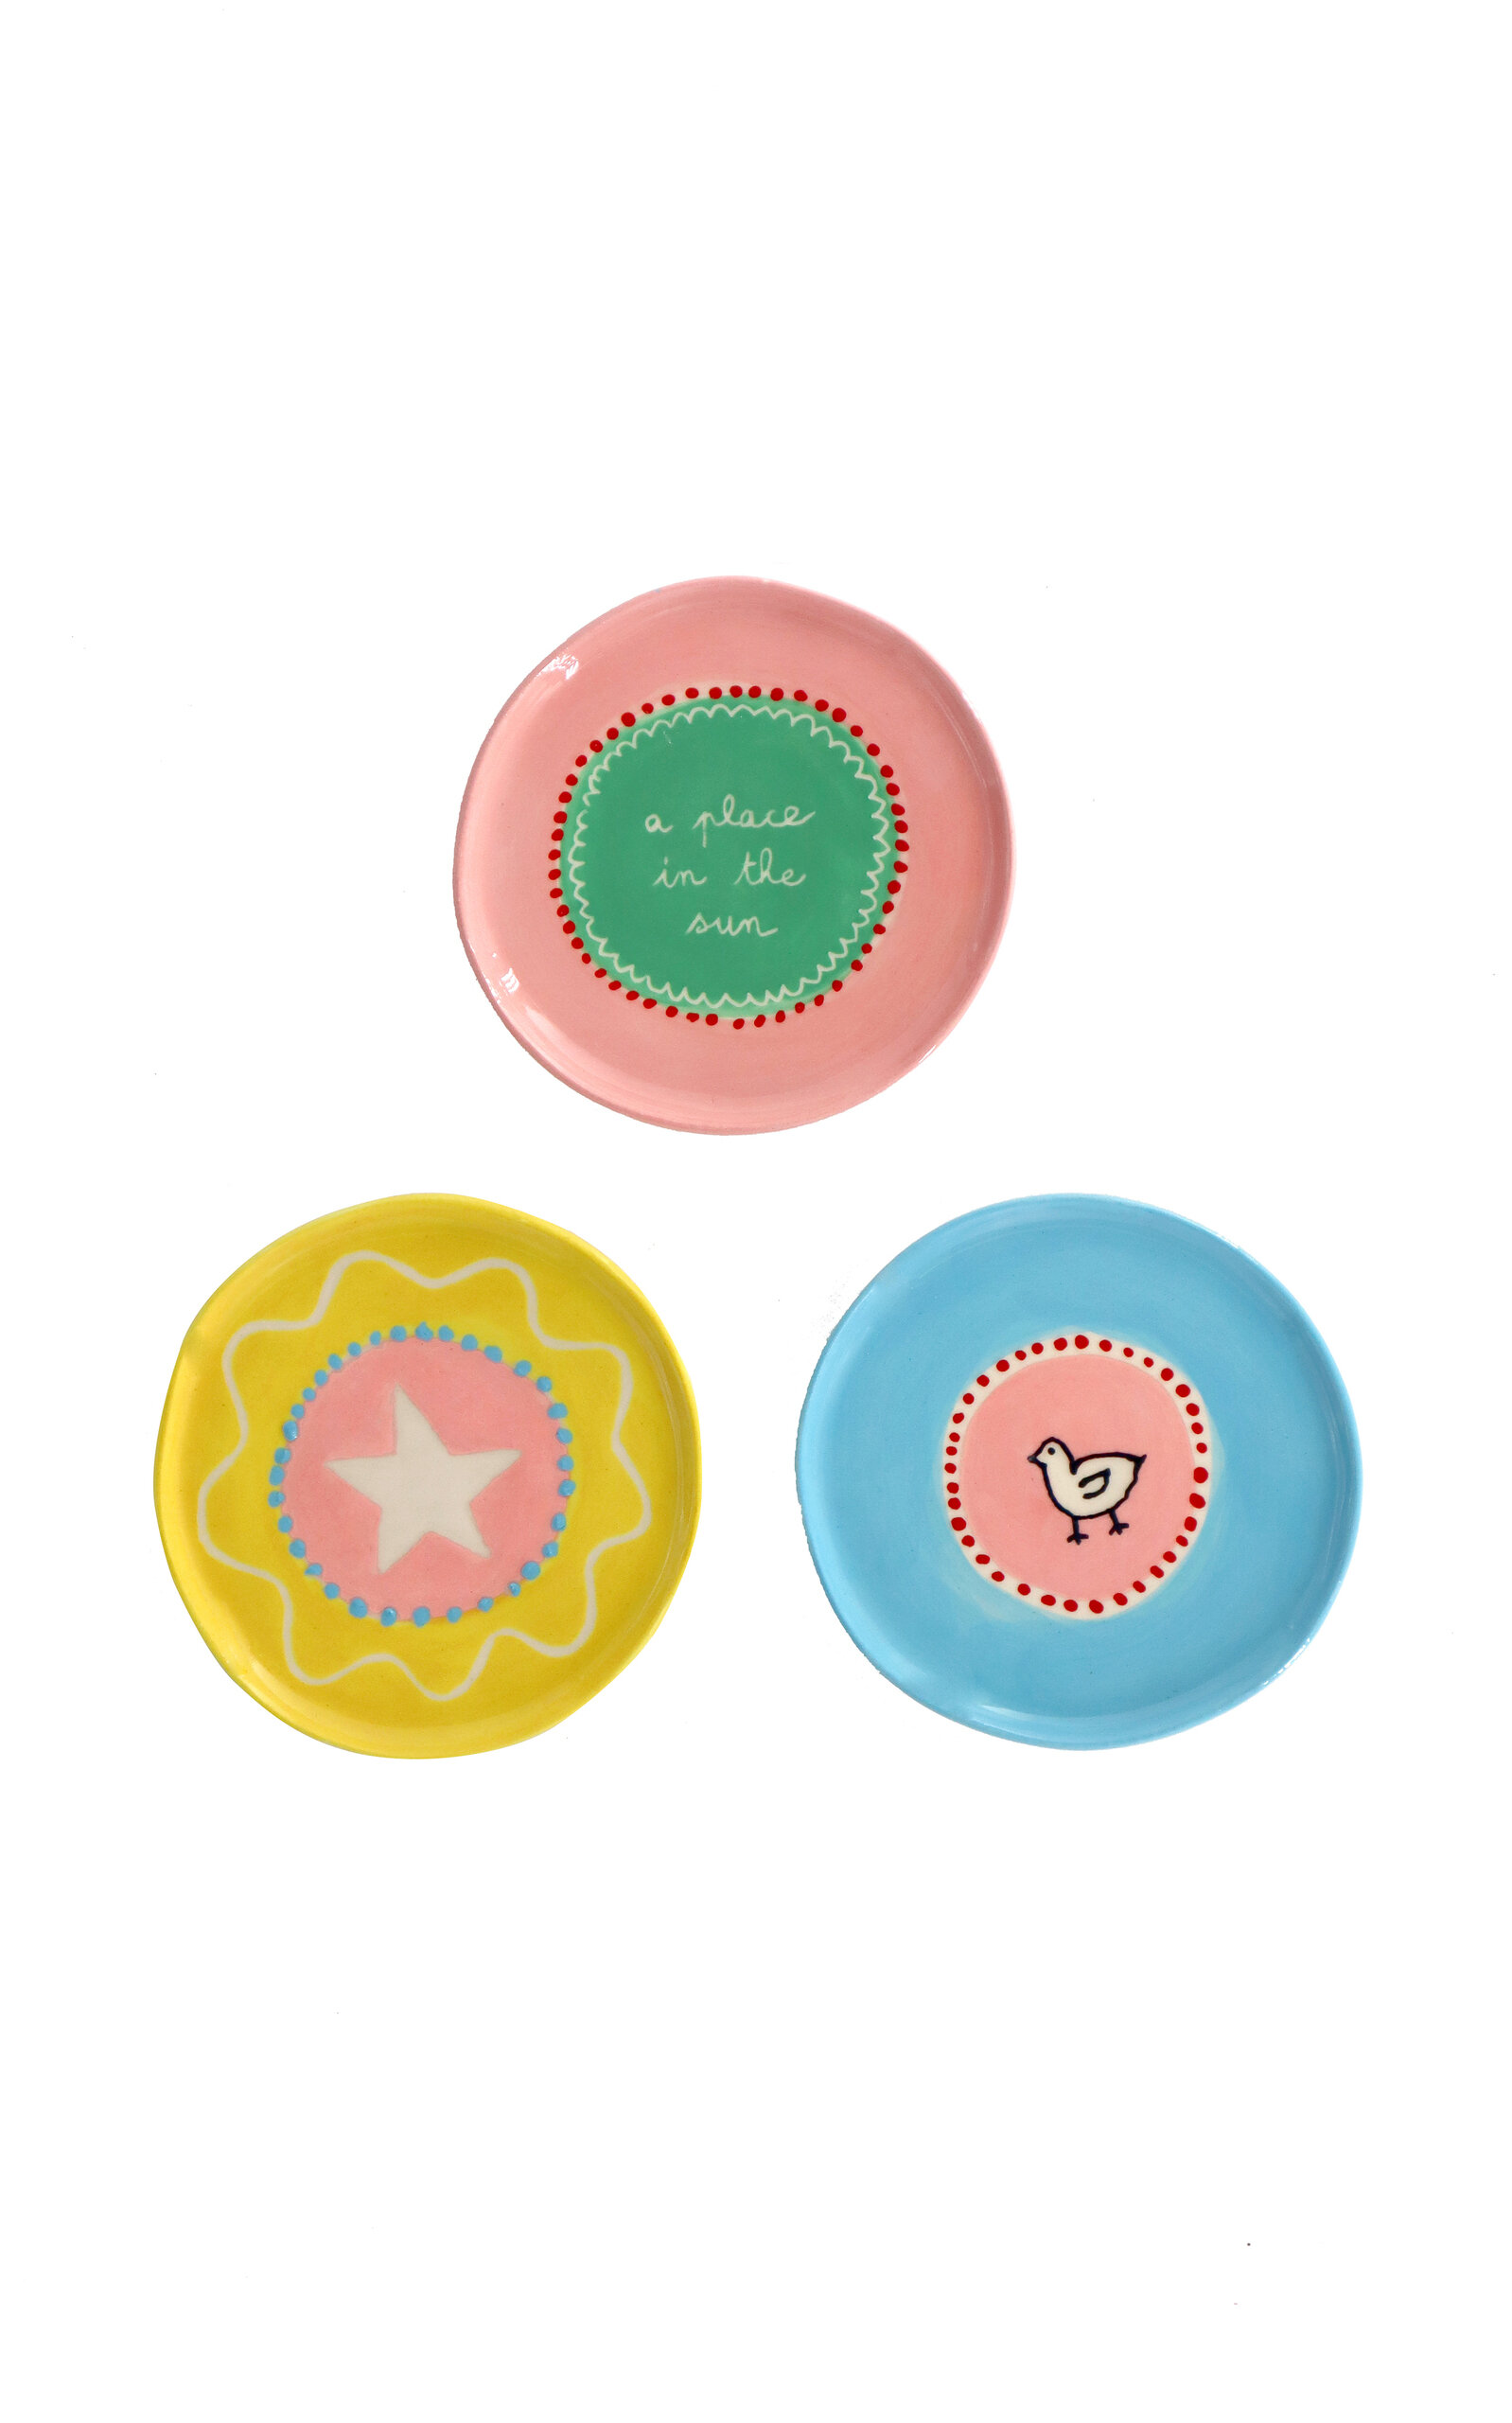 Laetitia Rouget A Place In The Sun Set Of 3 Jewellery Plates In Multi